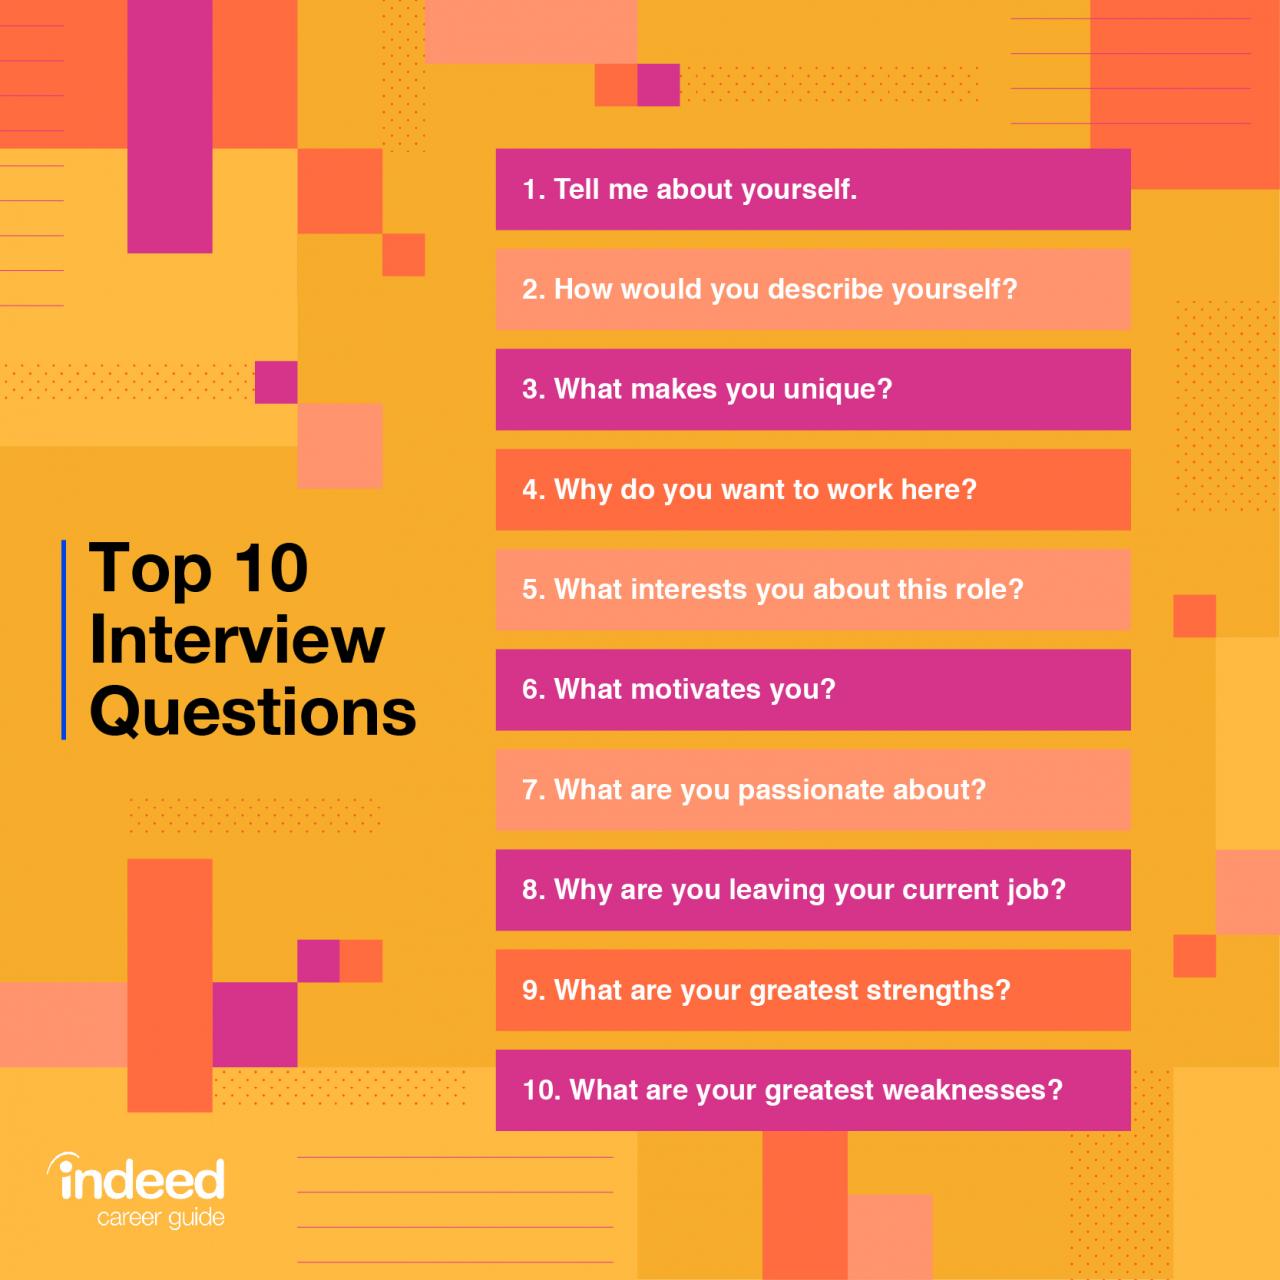 10 best answers in an interview